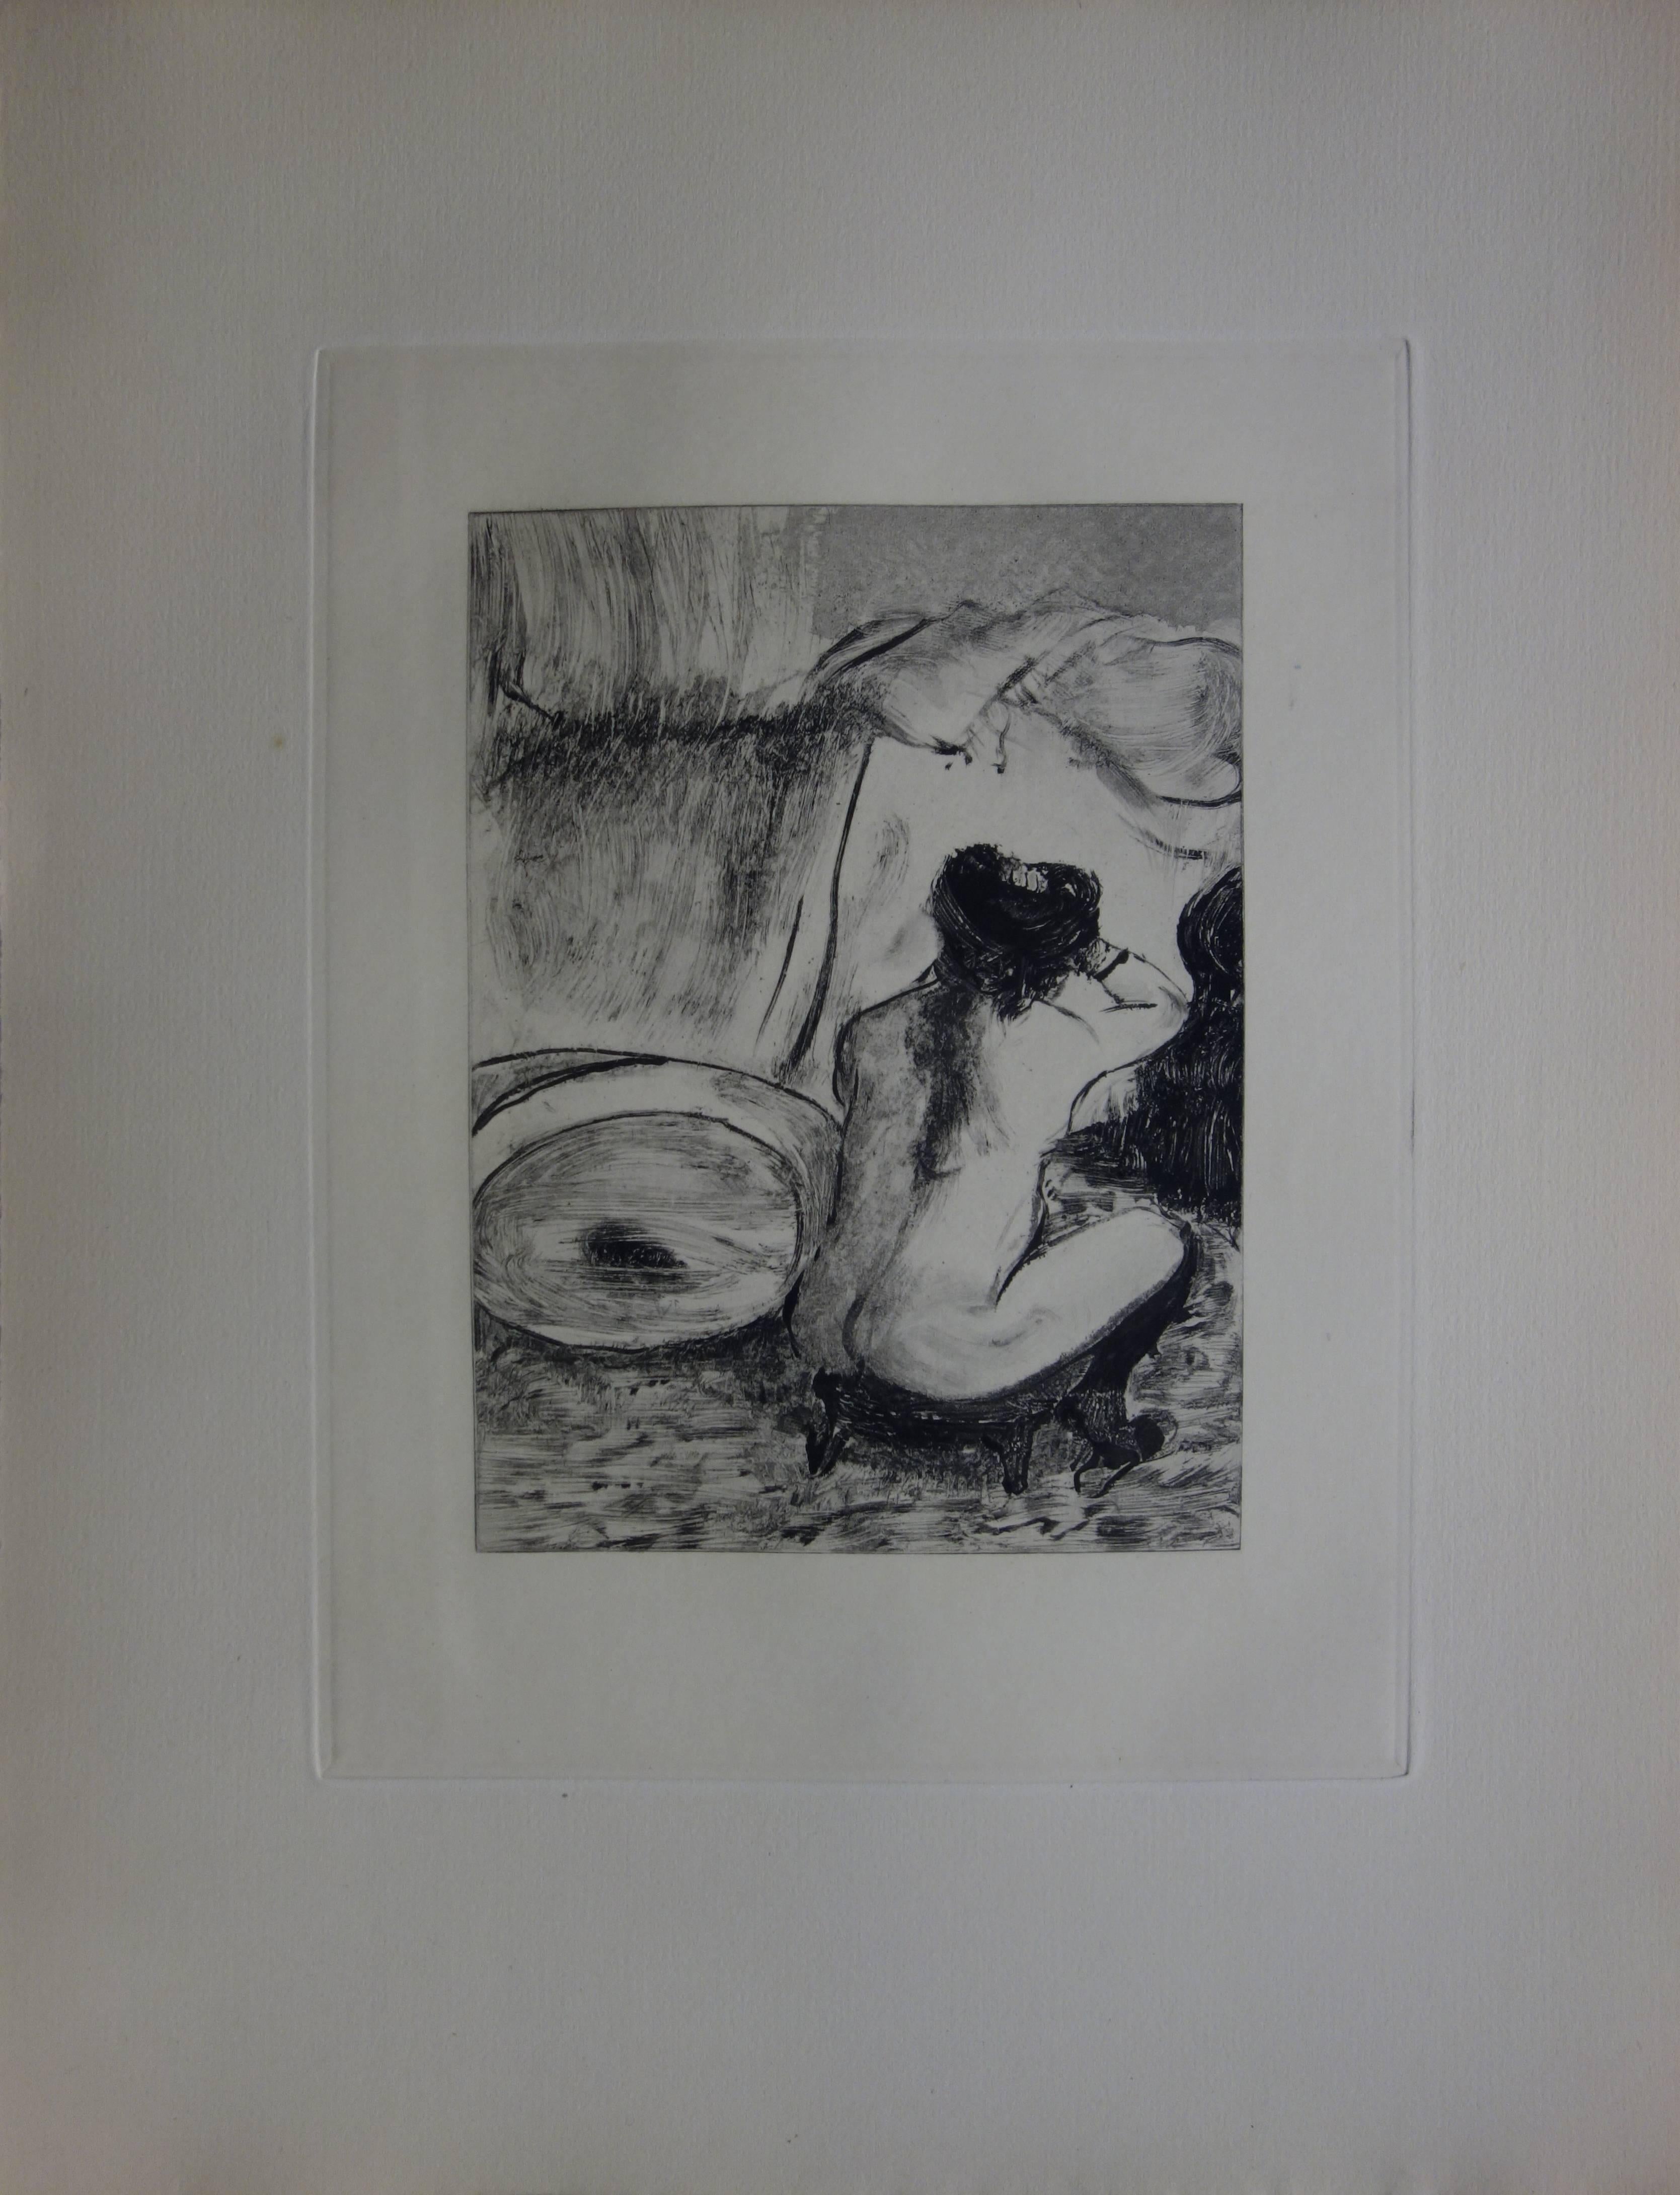 Whorehouse Scene : Prostitute Dressing her Hair - Original etching - Print by (after) Edgar Degas